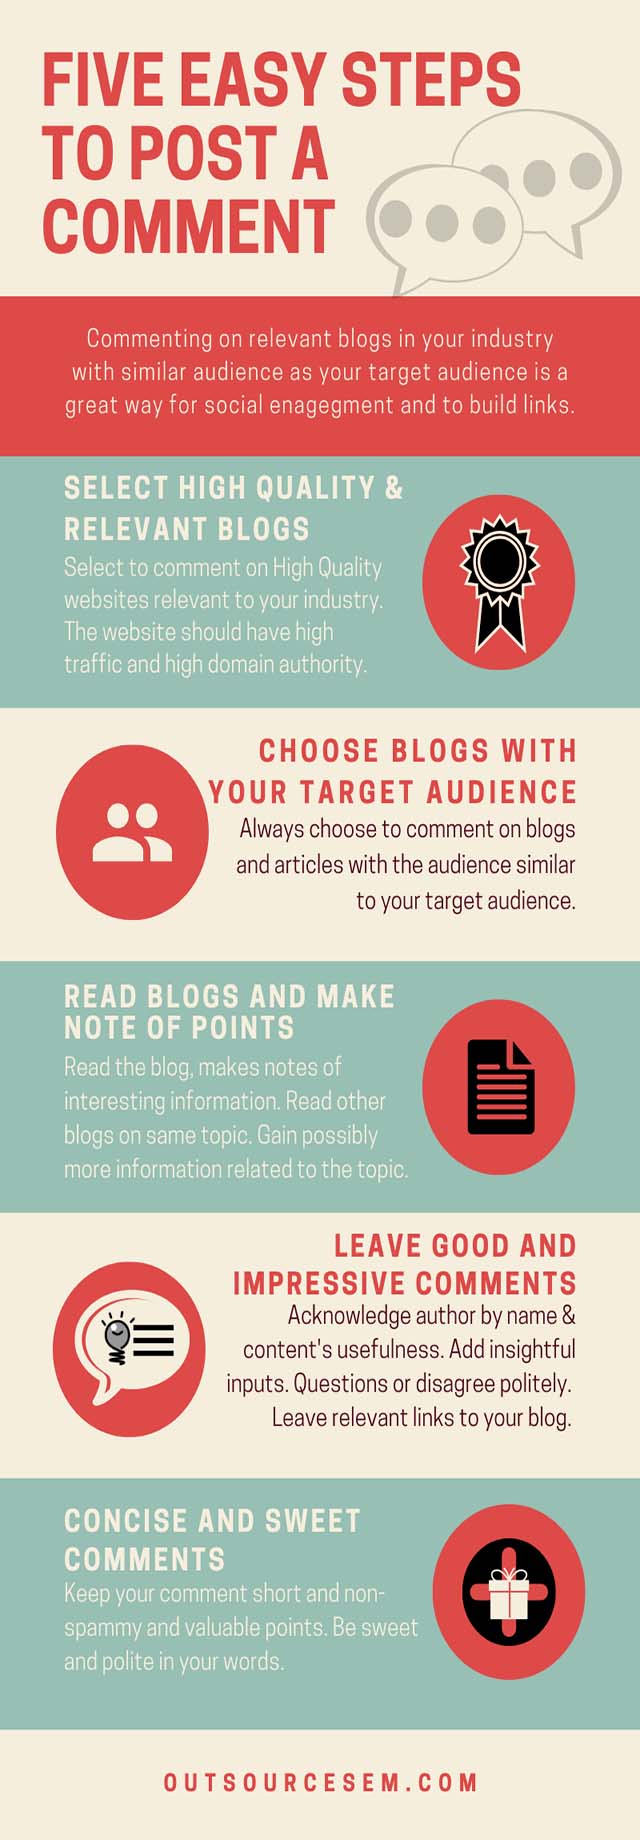 ultimate-guide-to-blog-commenting-steps-infographic